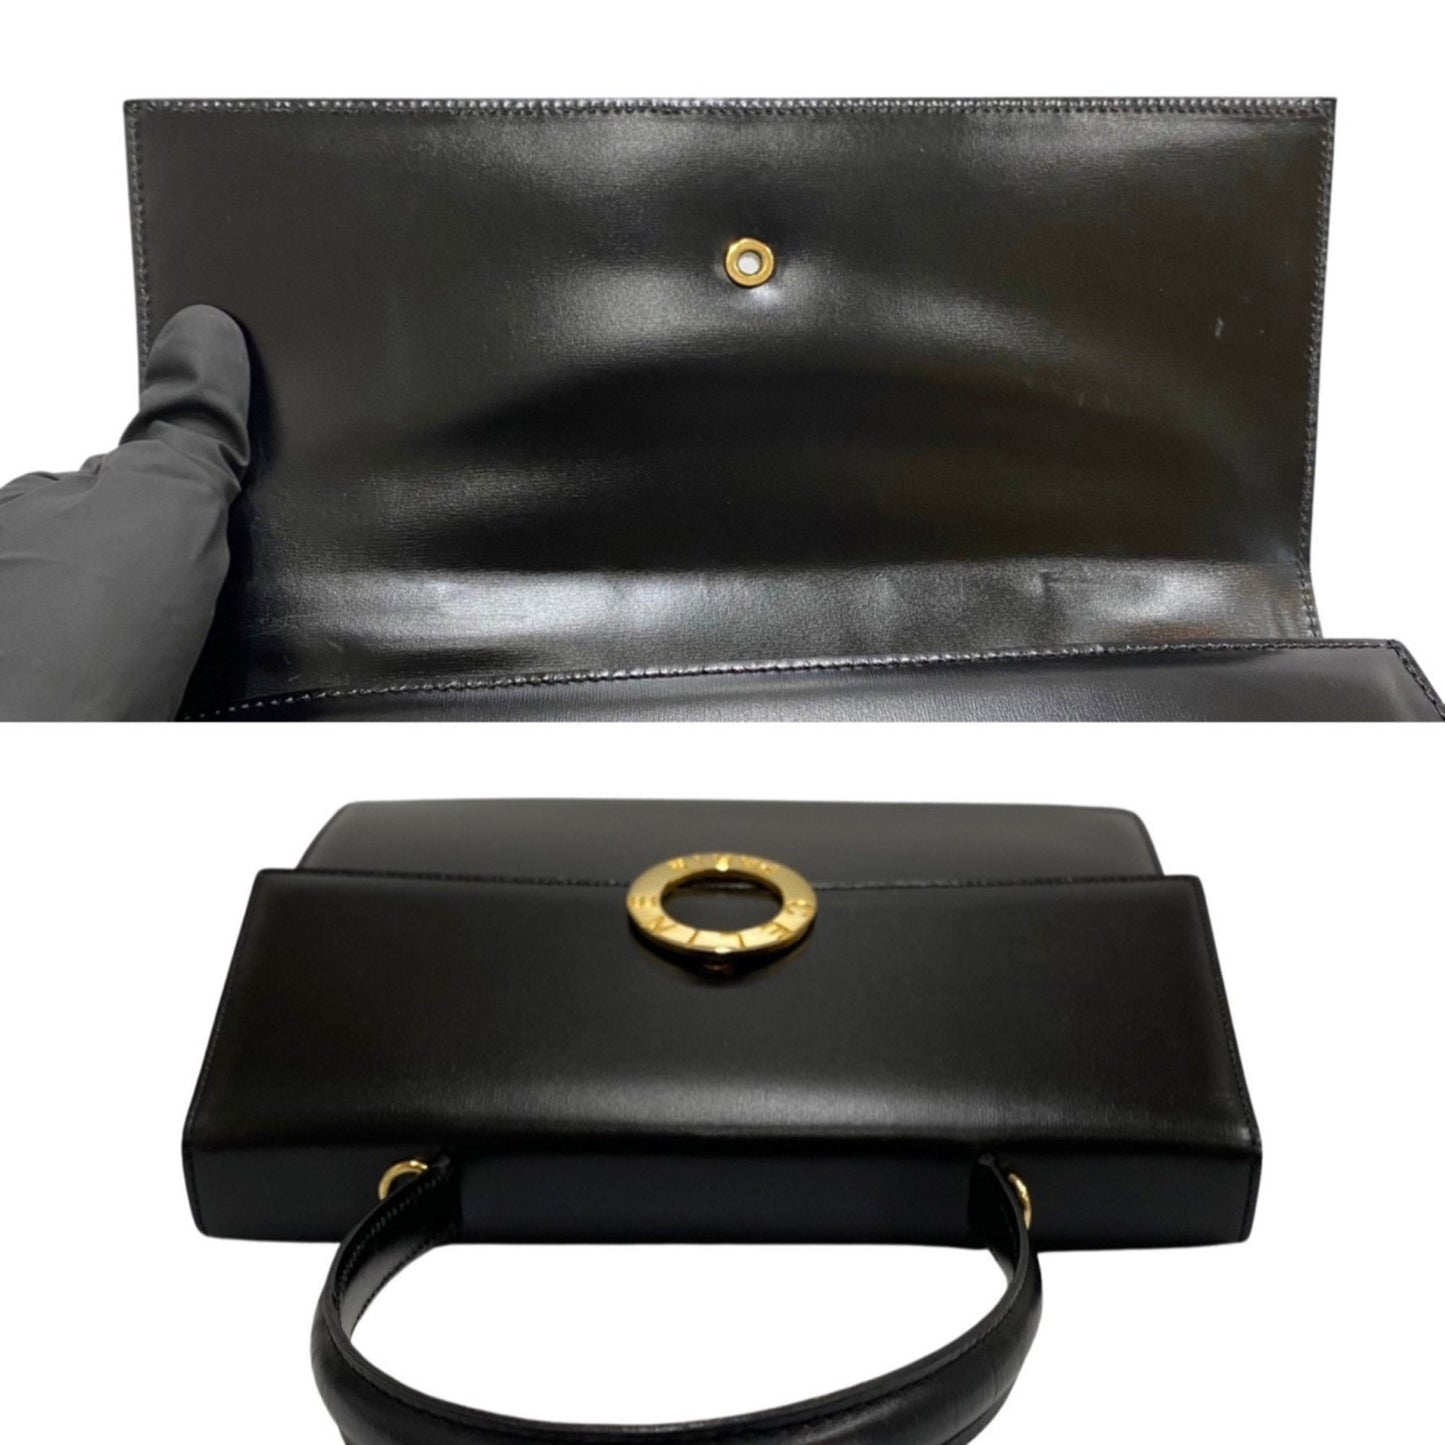 Celine Women's Sophisticated Leather Shoulder Bag with Iconic Logo in Black